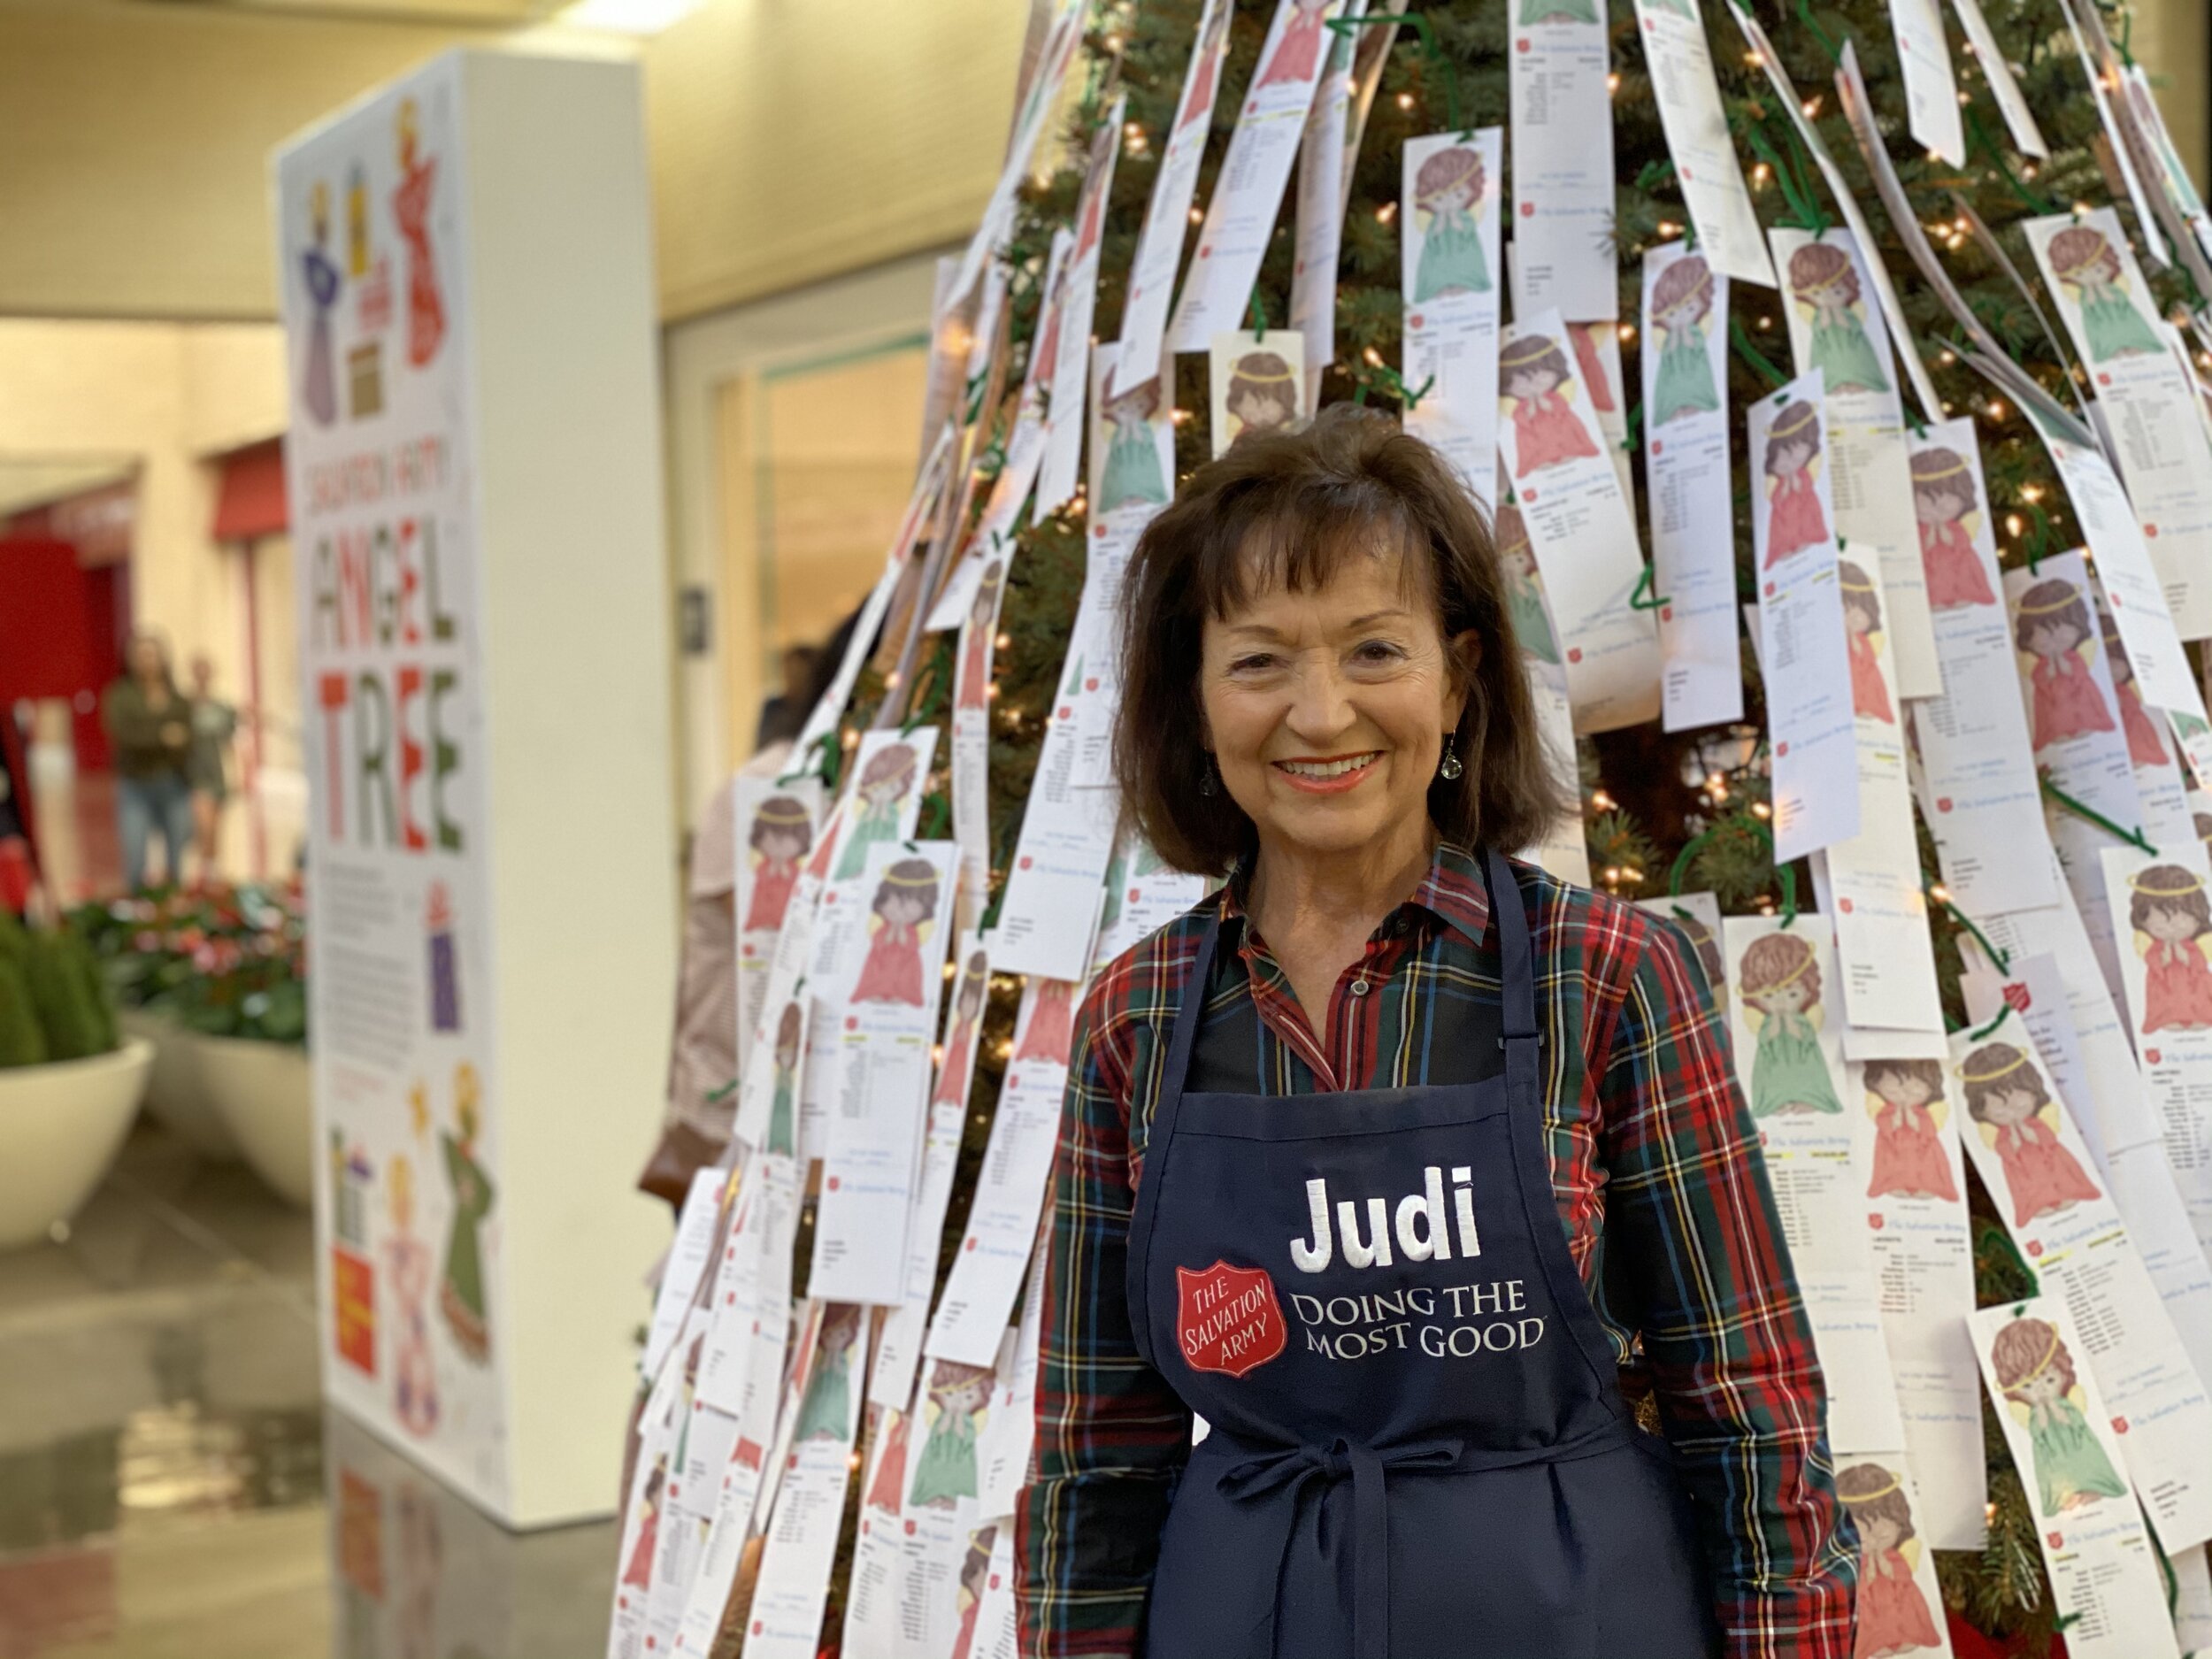  Judi Lalla has been working the Salvation Army Angel Tree at NorthPark for the past 16 years, a tradition in the North Texas area that stretches back to 1984. This year, the Angel Tree program will serve more than 45,000 children in North Texas. Nor